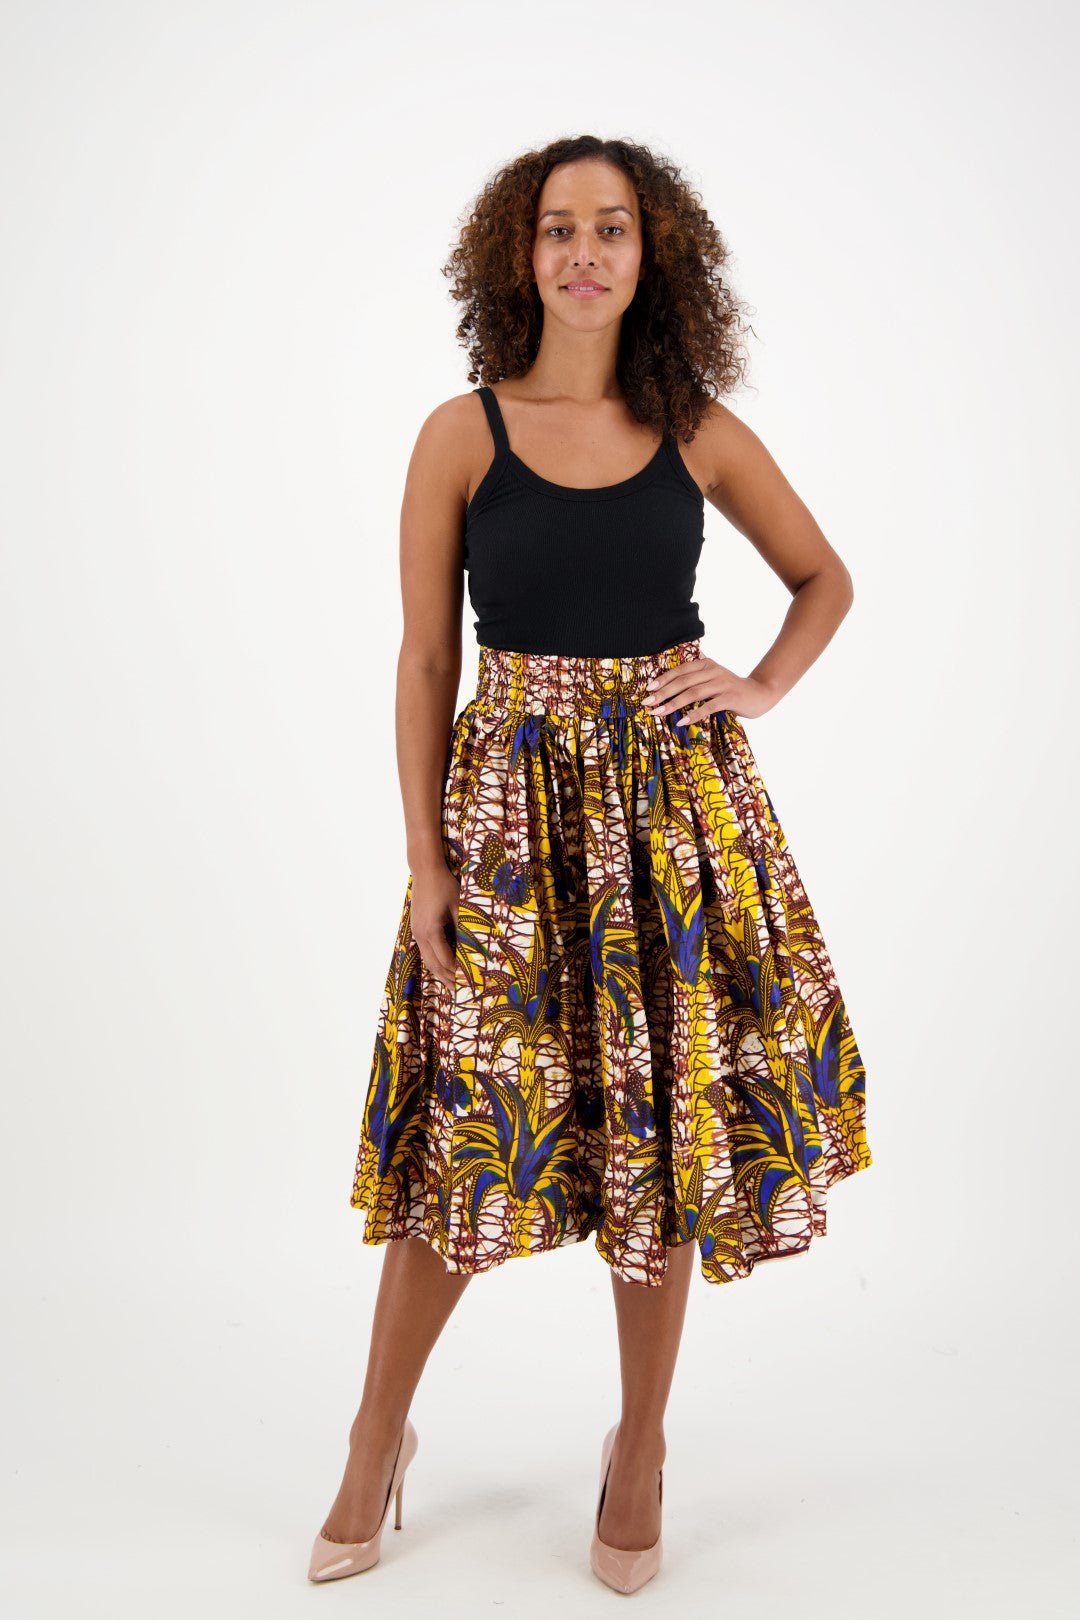 Mid-Length African Print Maxi Skirt Pockets Headwrap Included 16321-528 - Advance Apparels Inc